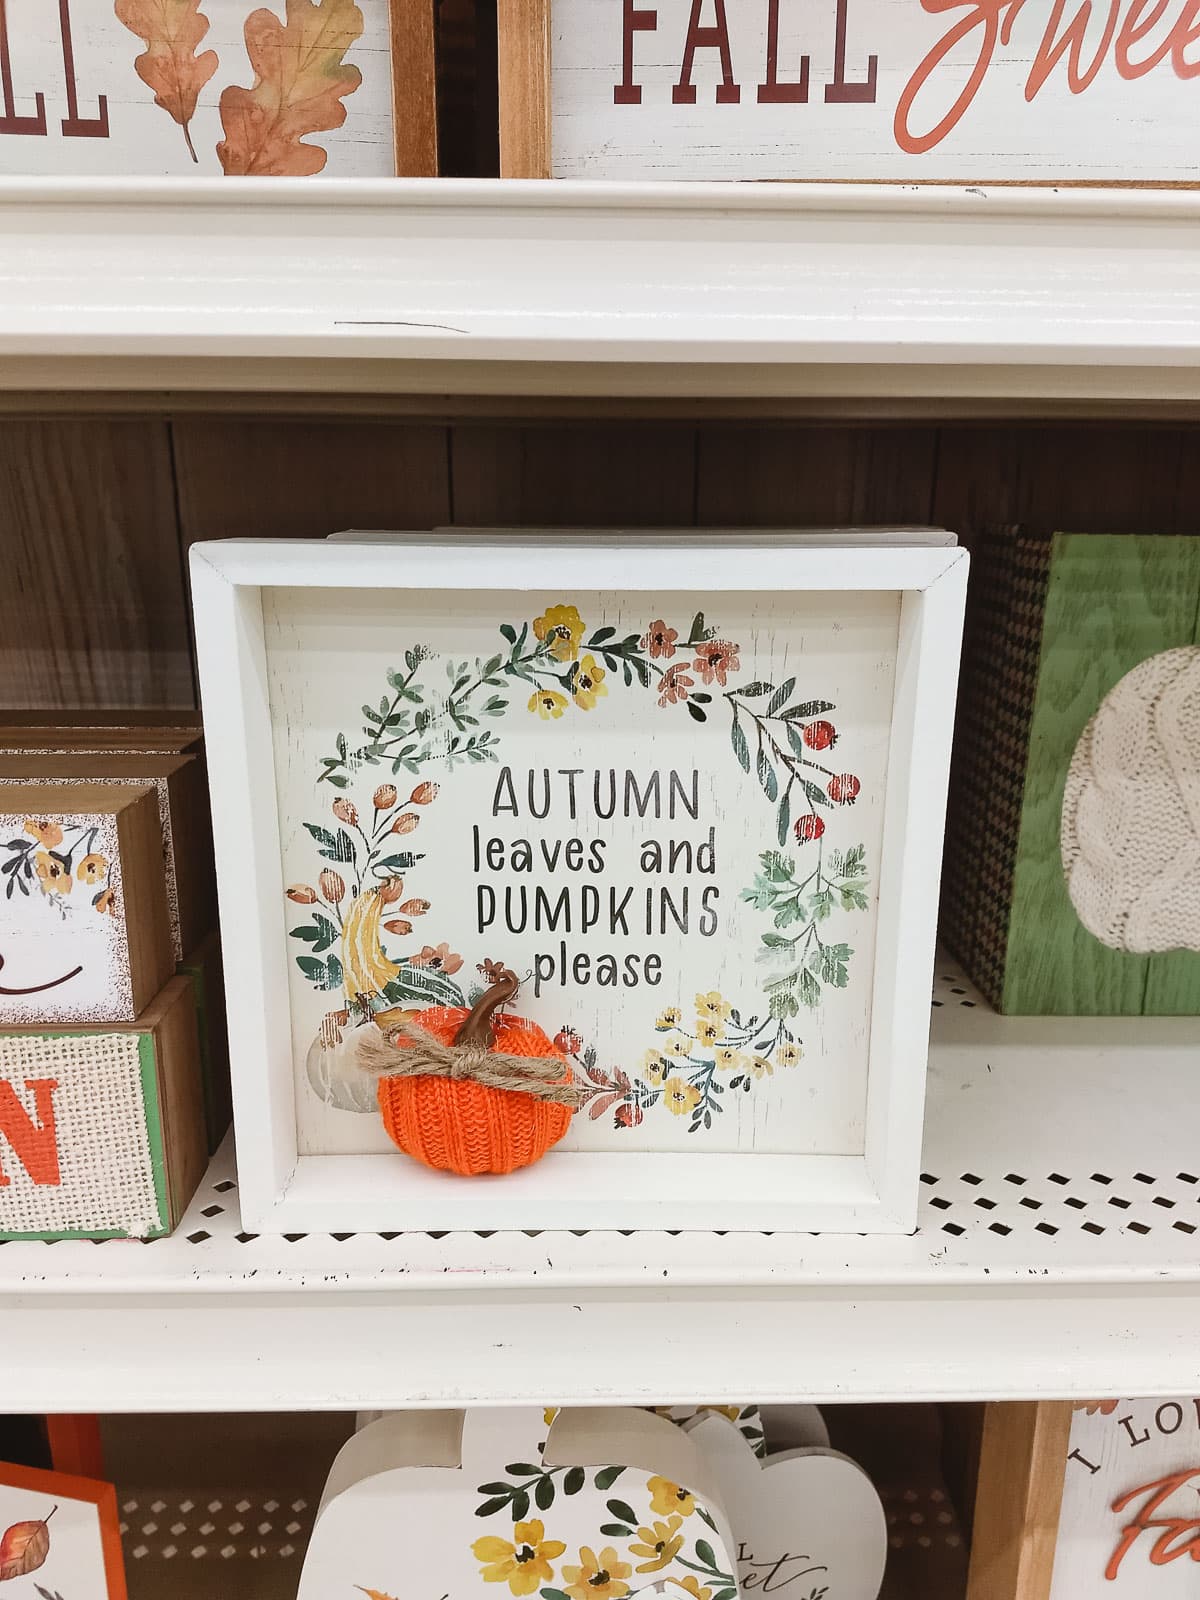 A fall sign at Michael's that reads, "Autumn Leaves and Pumpkins Please".